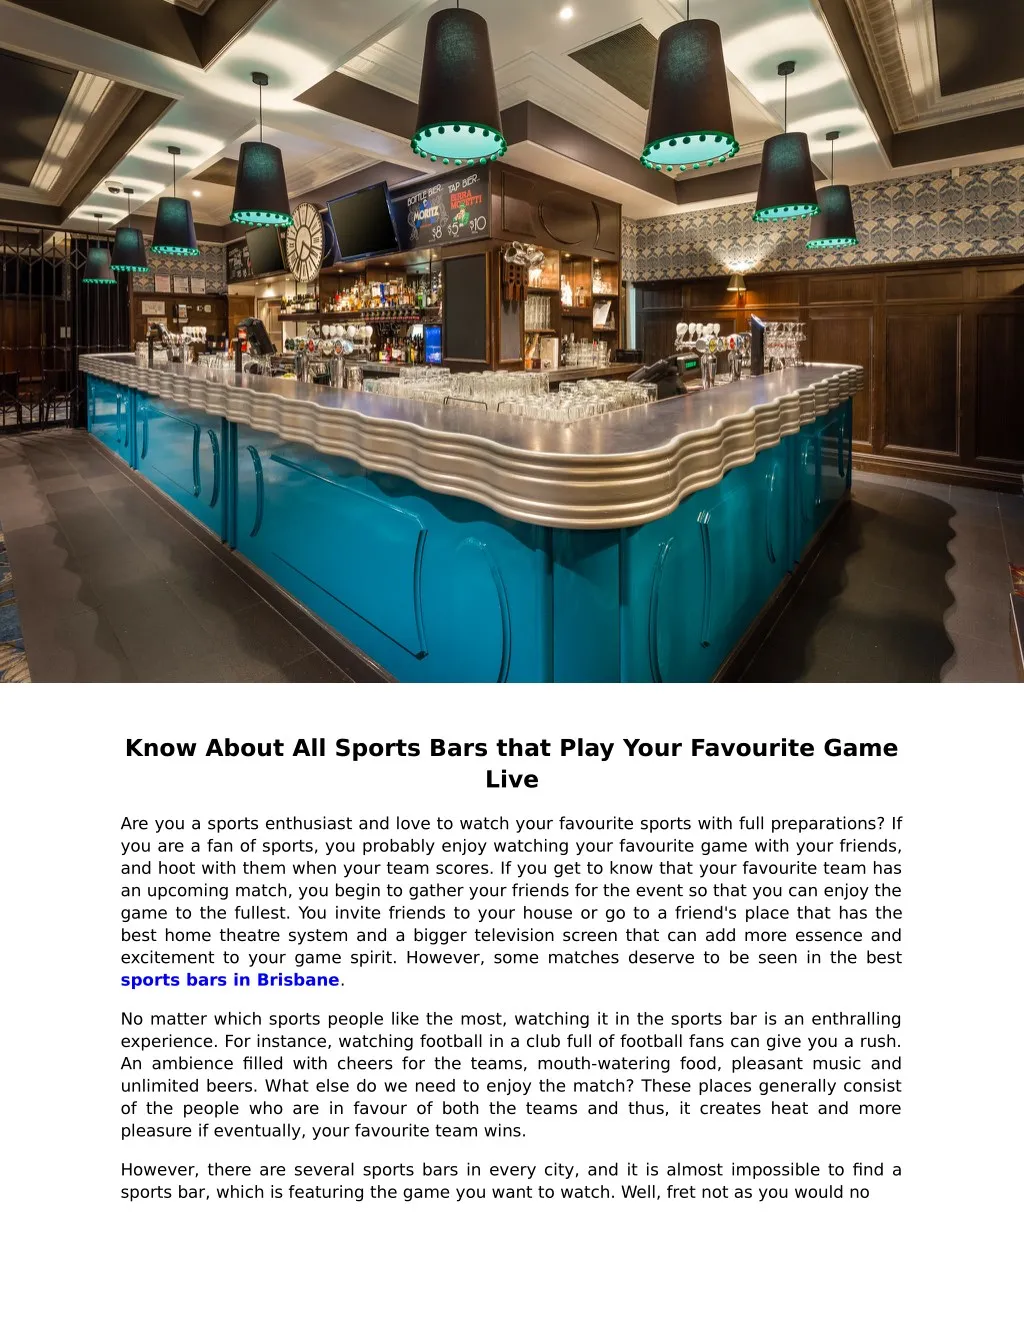 know about all sports bars that play your